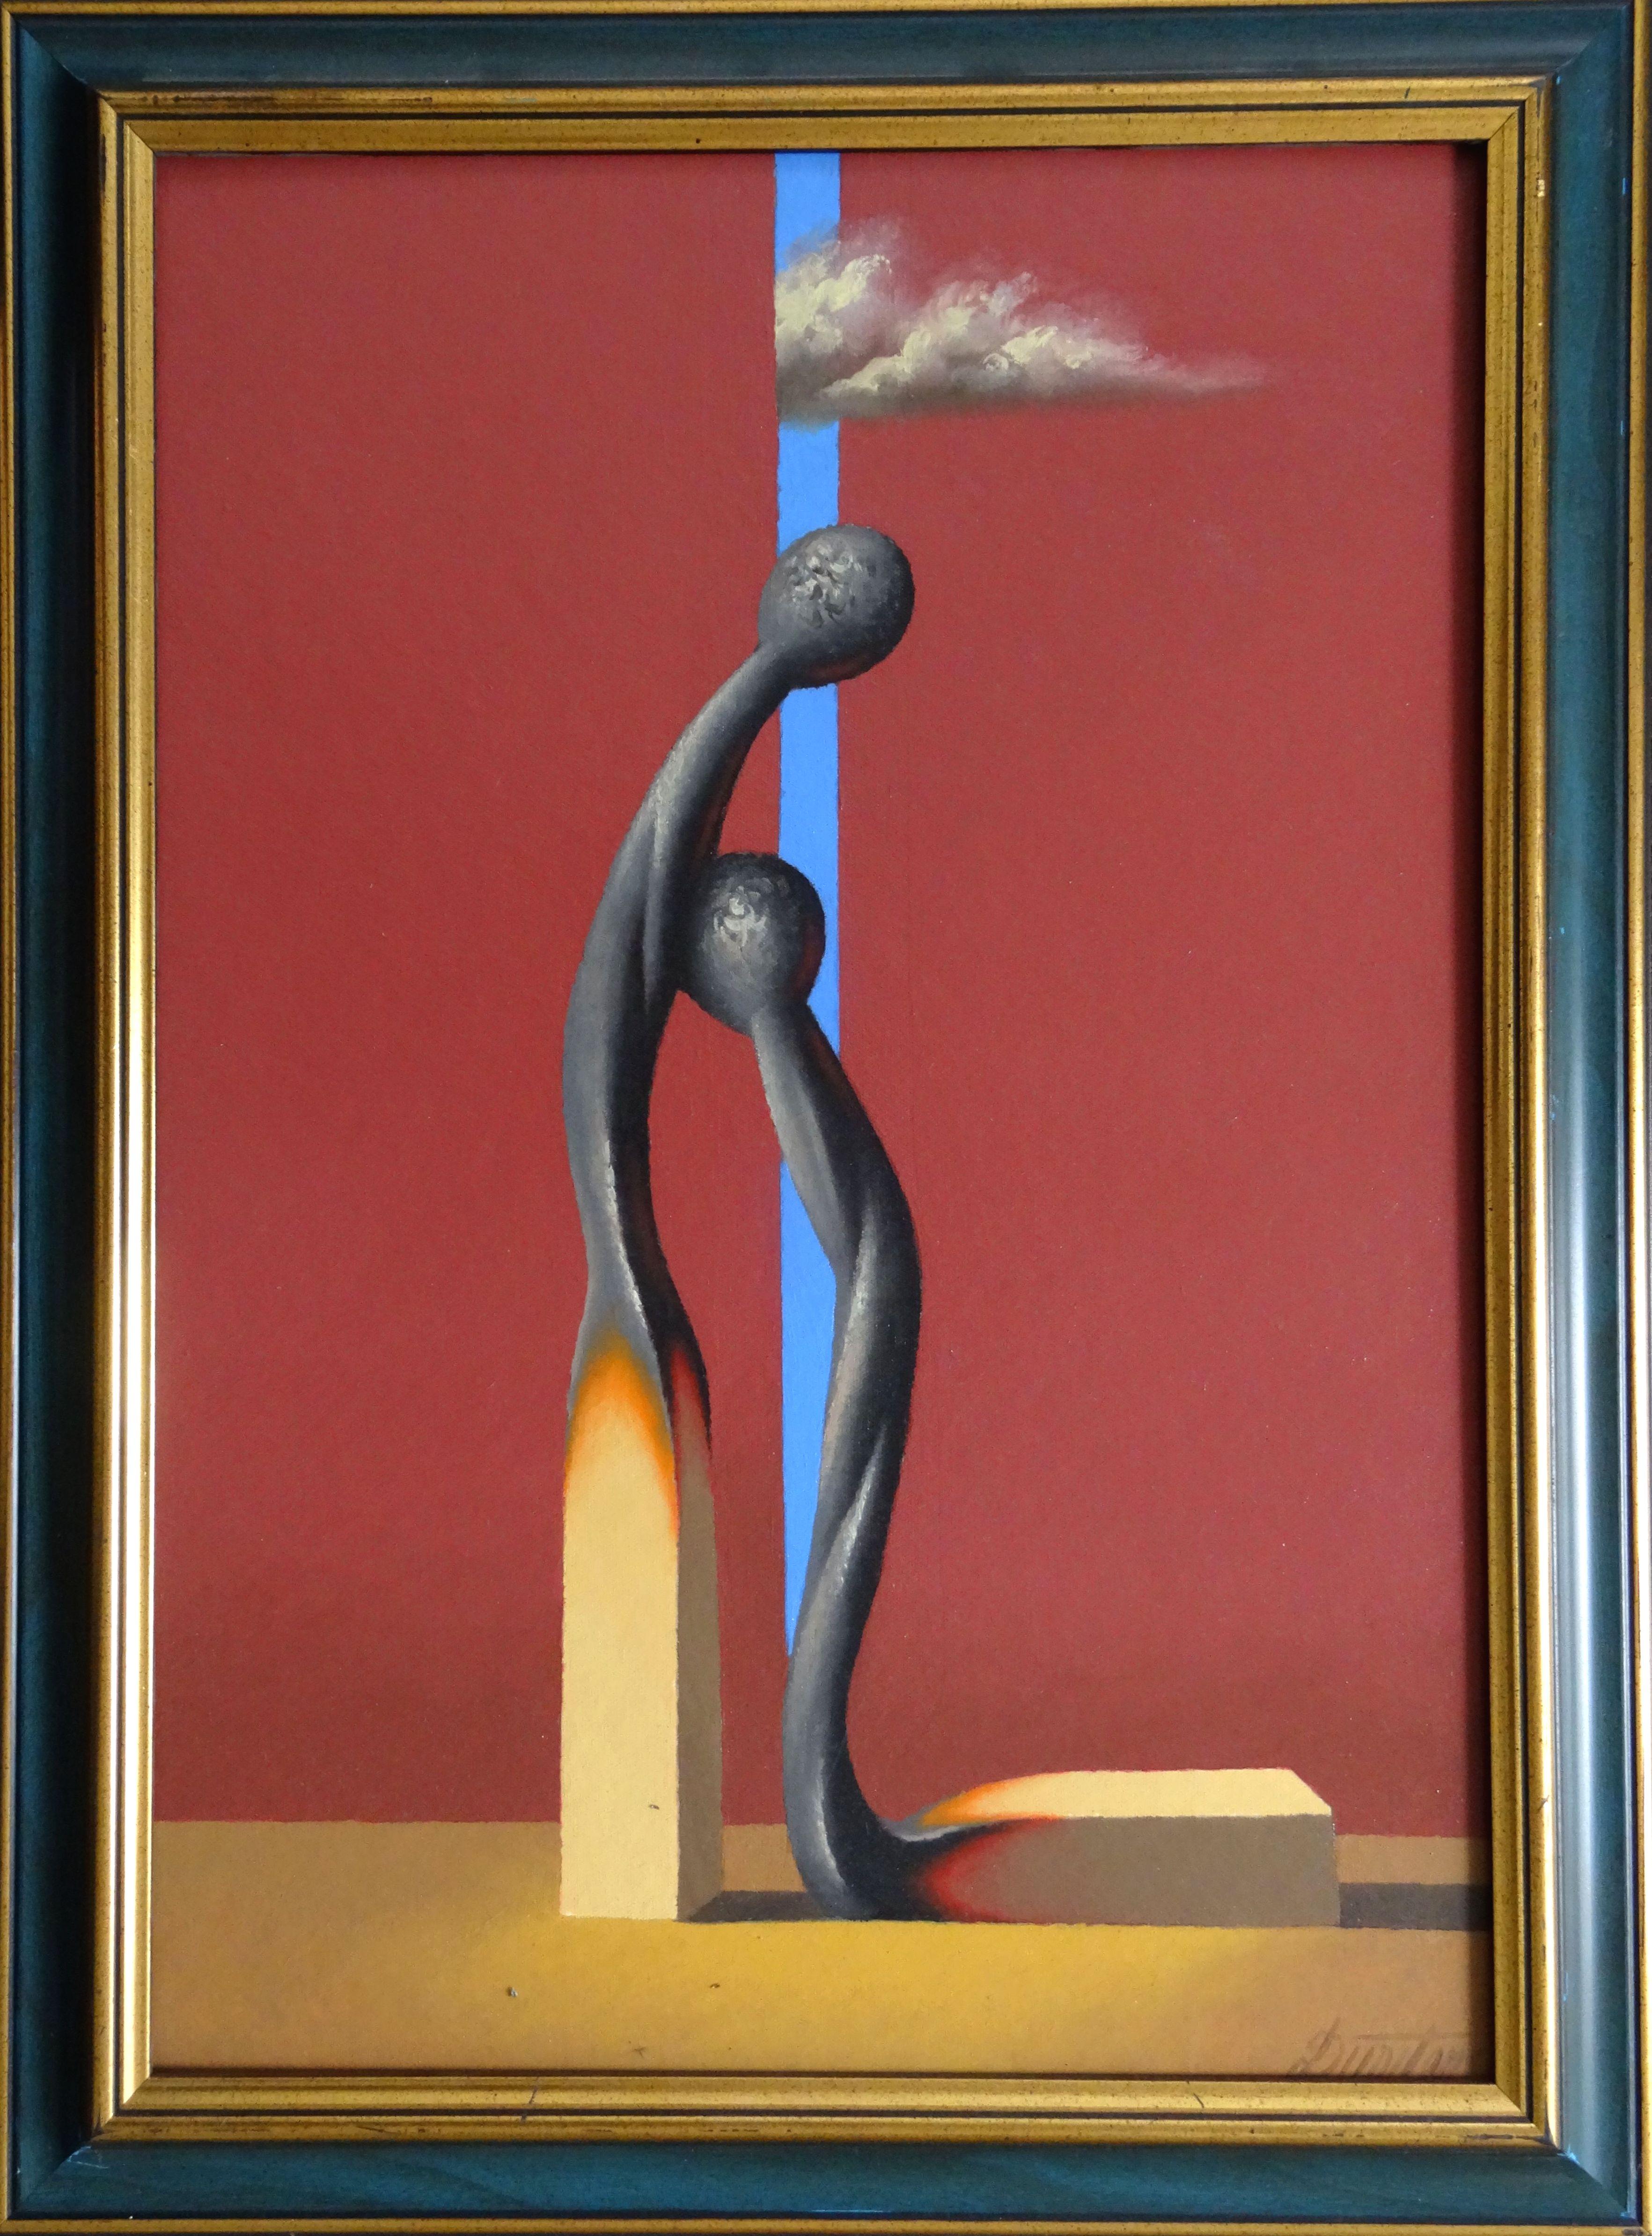 Forgiveness. 2011. Cardboard, canvas, oil, 50x35 cm - Painting by Juris Dimiters